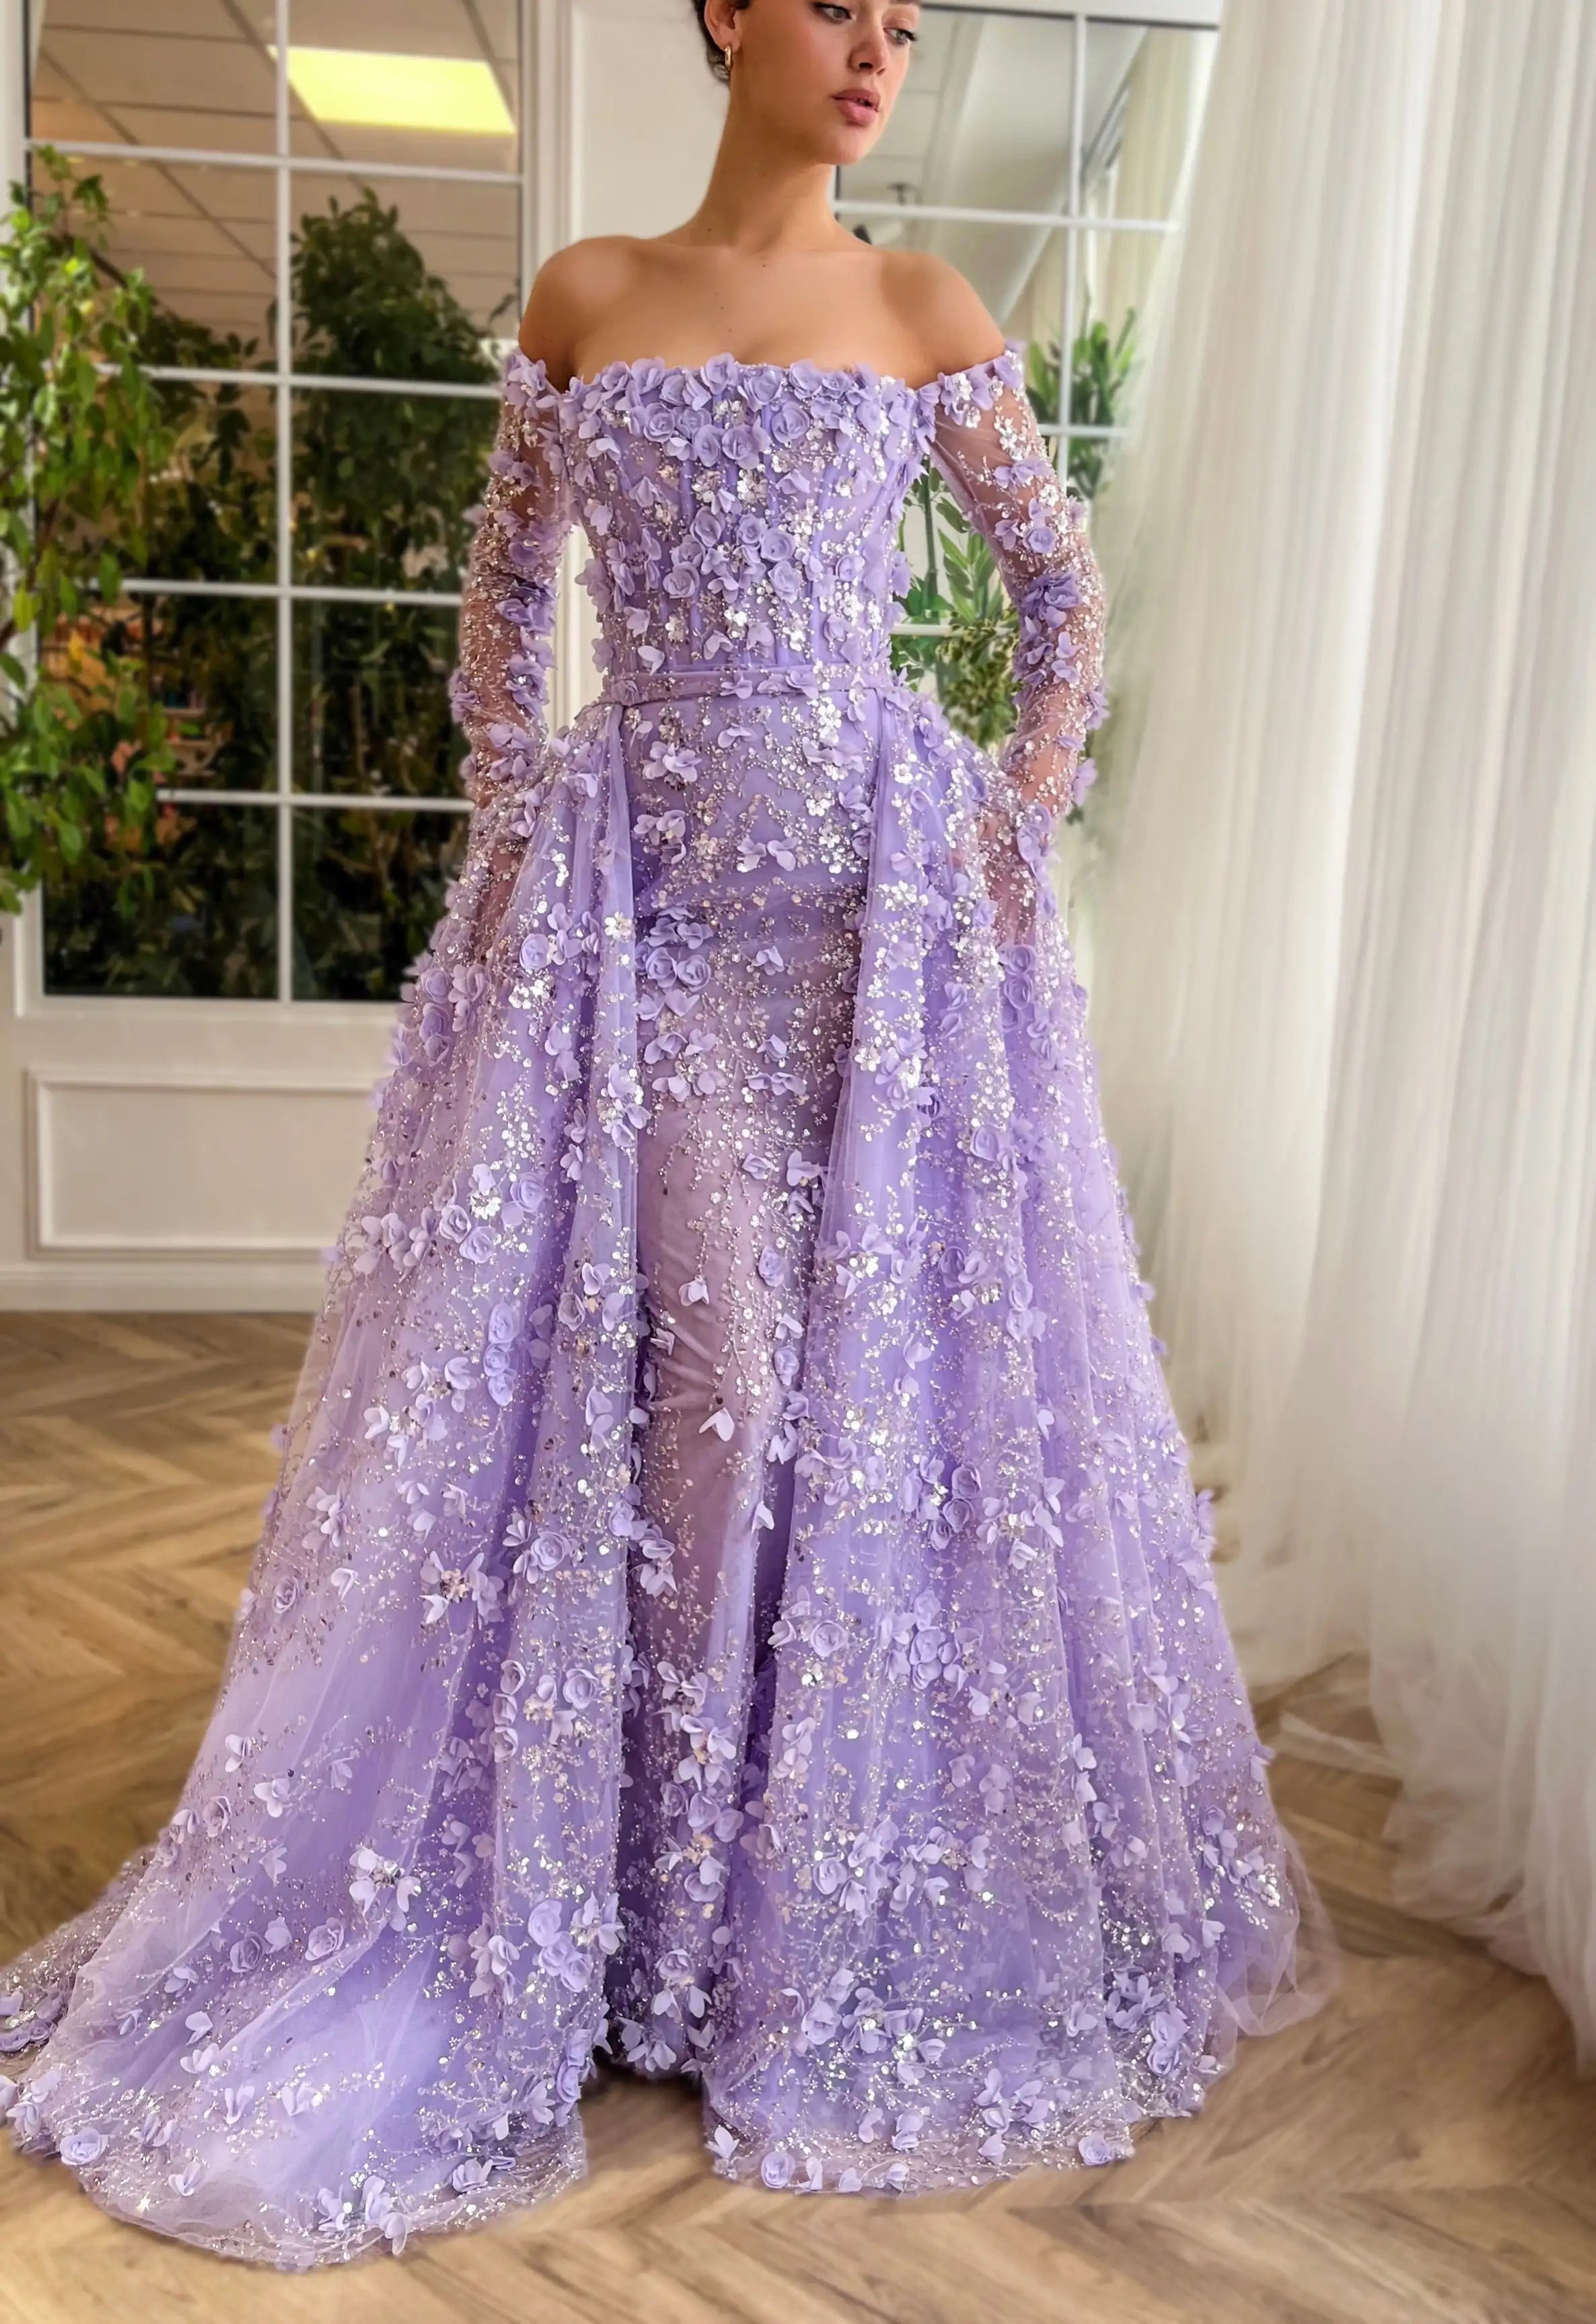 UU-Sharon Said Elegant 3D Flowers Pink Luxury Dubai Evening Dress with Overskirt Lilac Long Sleeves Women Wedding Party Gown